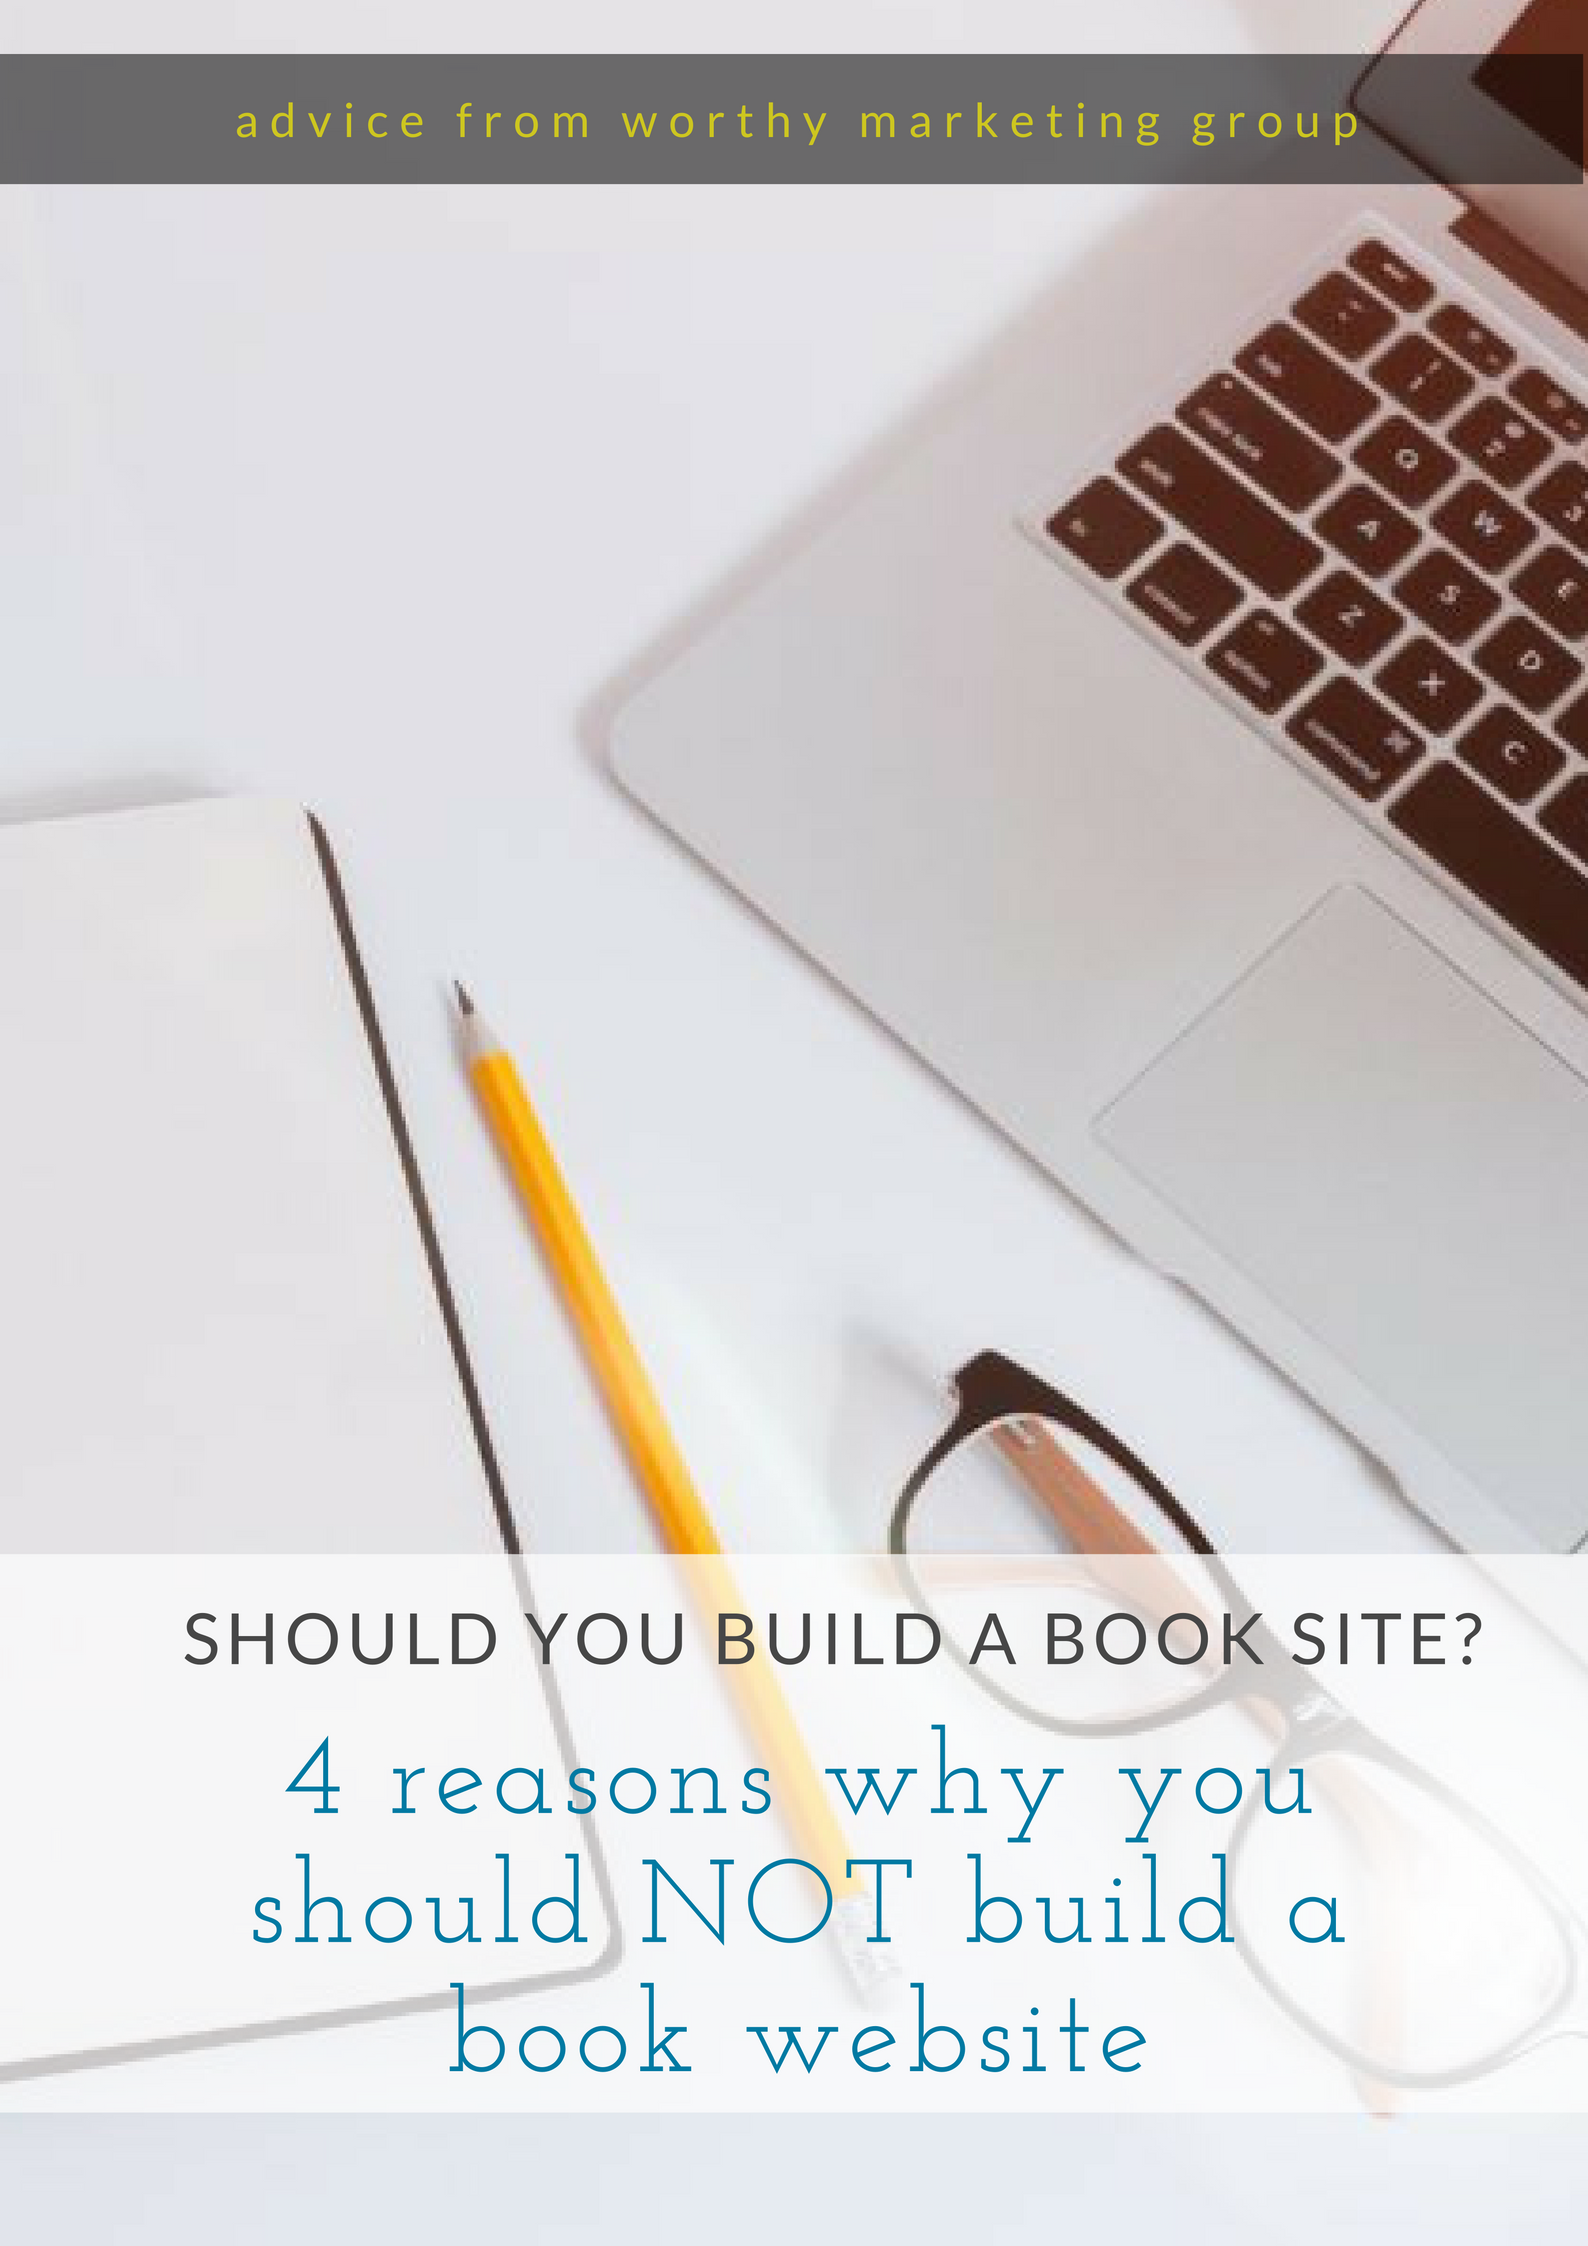 4 Reasons You Should NOT Build a Book Website | The Worthy Marketing Group Blog